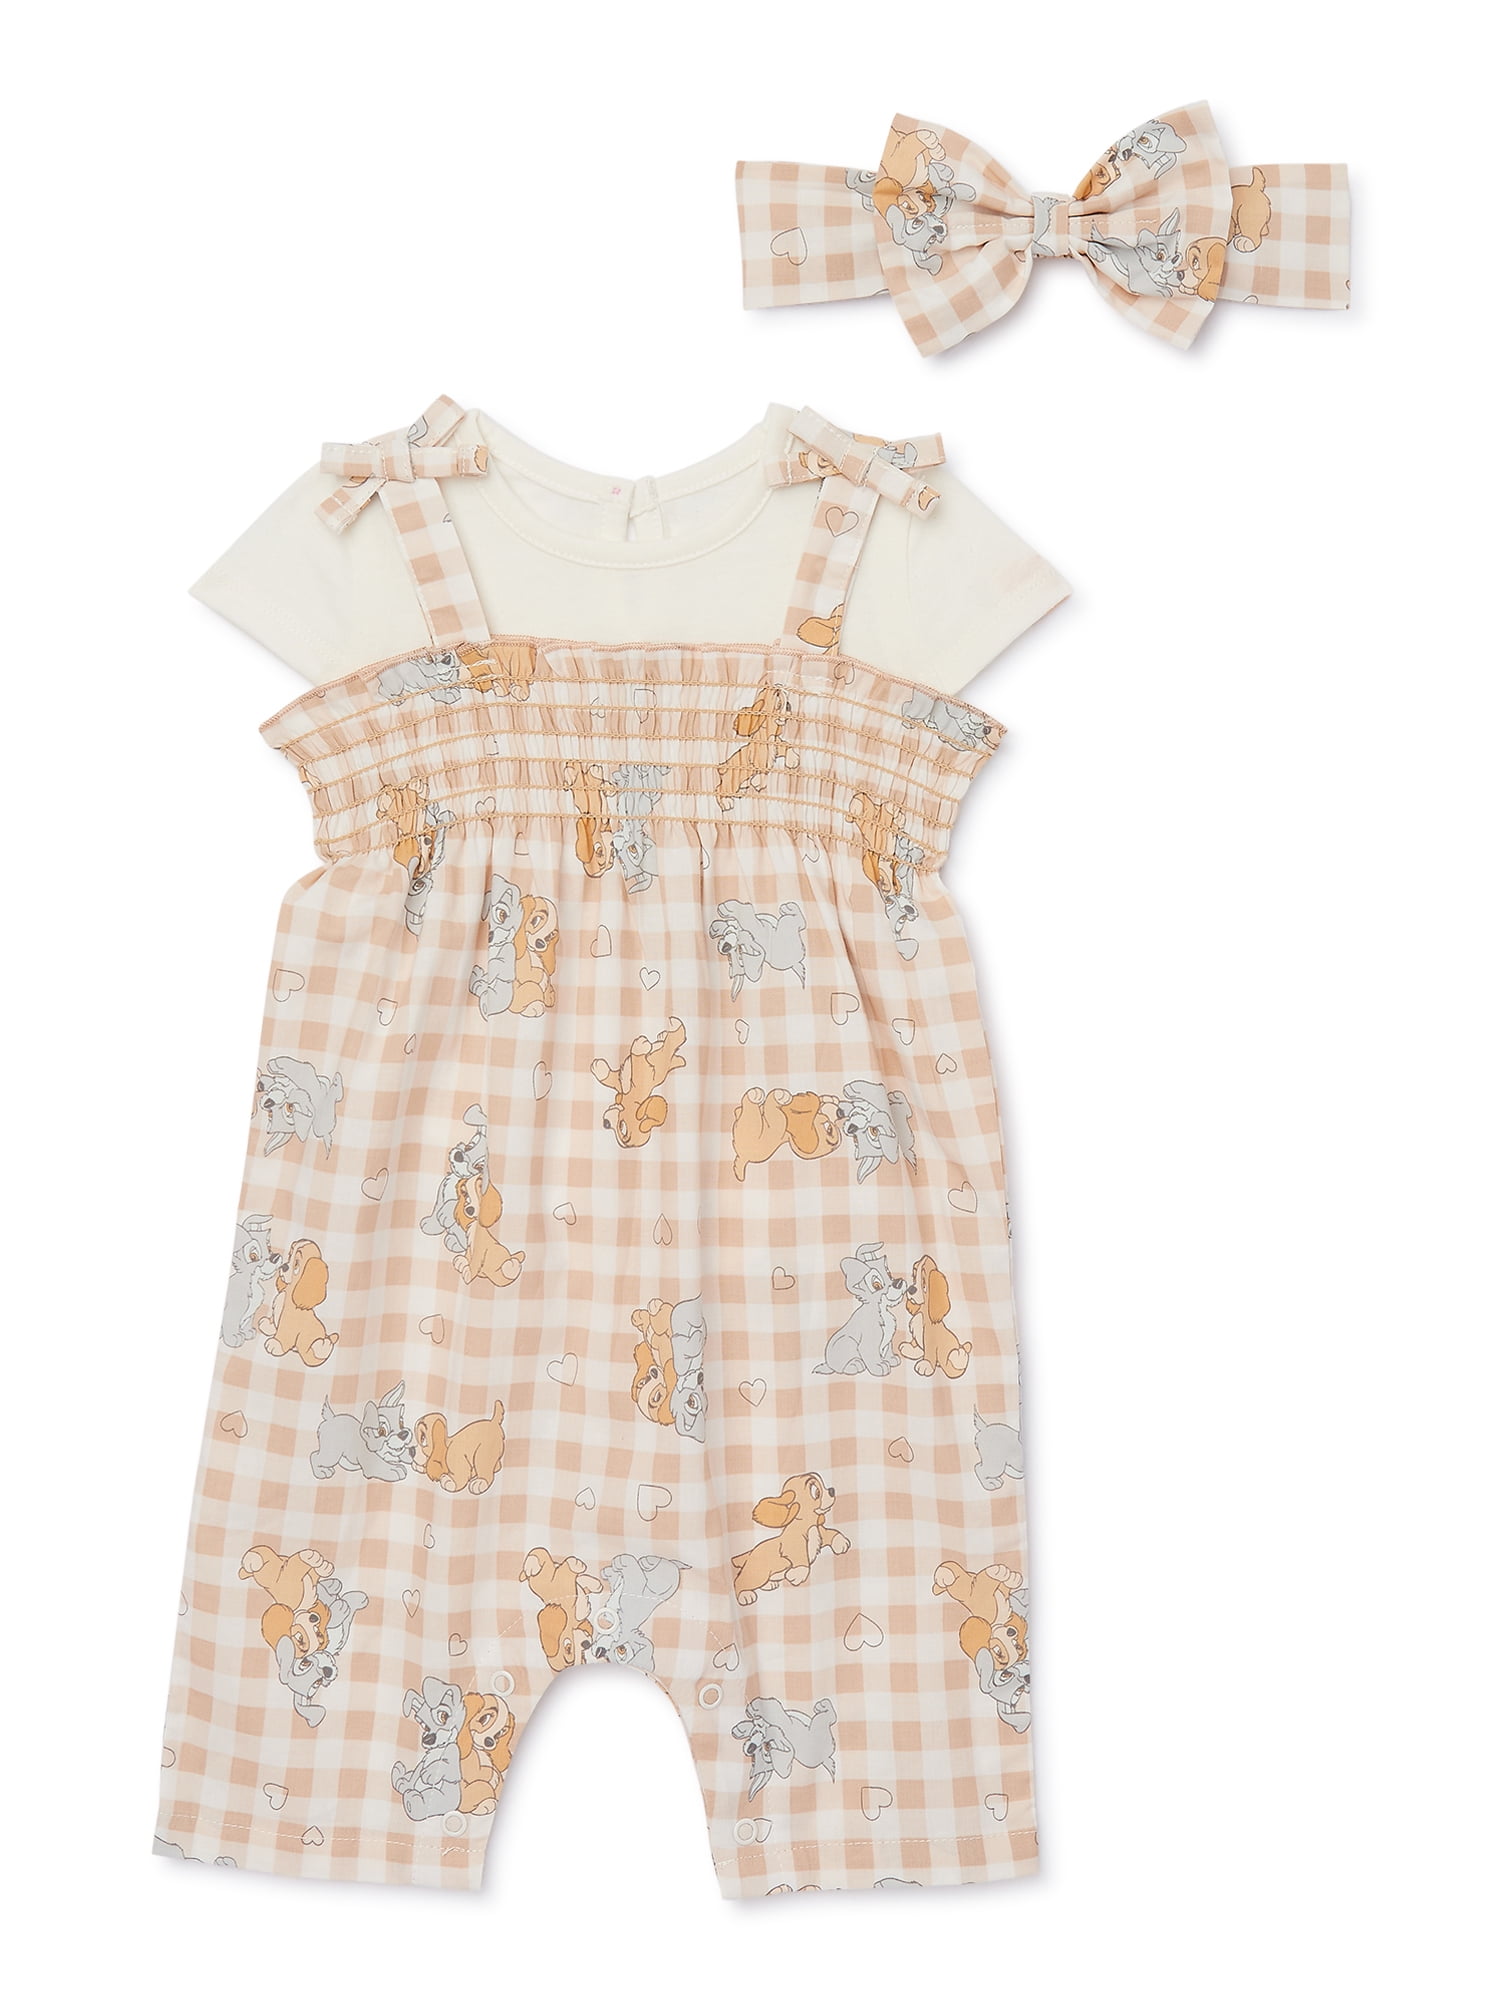 Lady and the Tramp Baby Girls Romper Set, 3-Piece, Sizes 0-24 Months